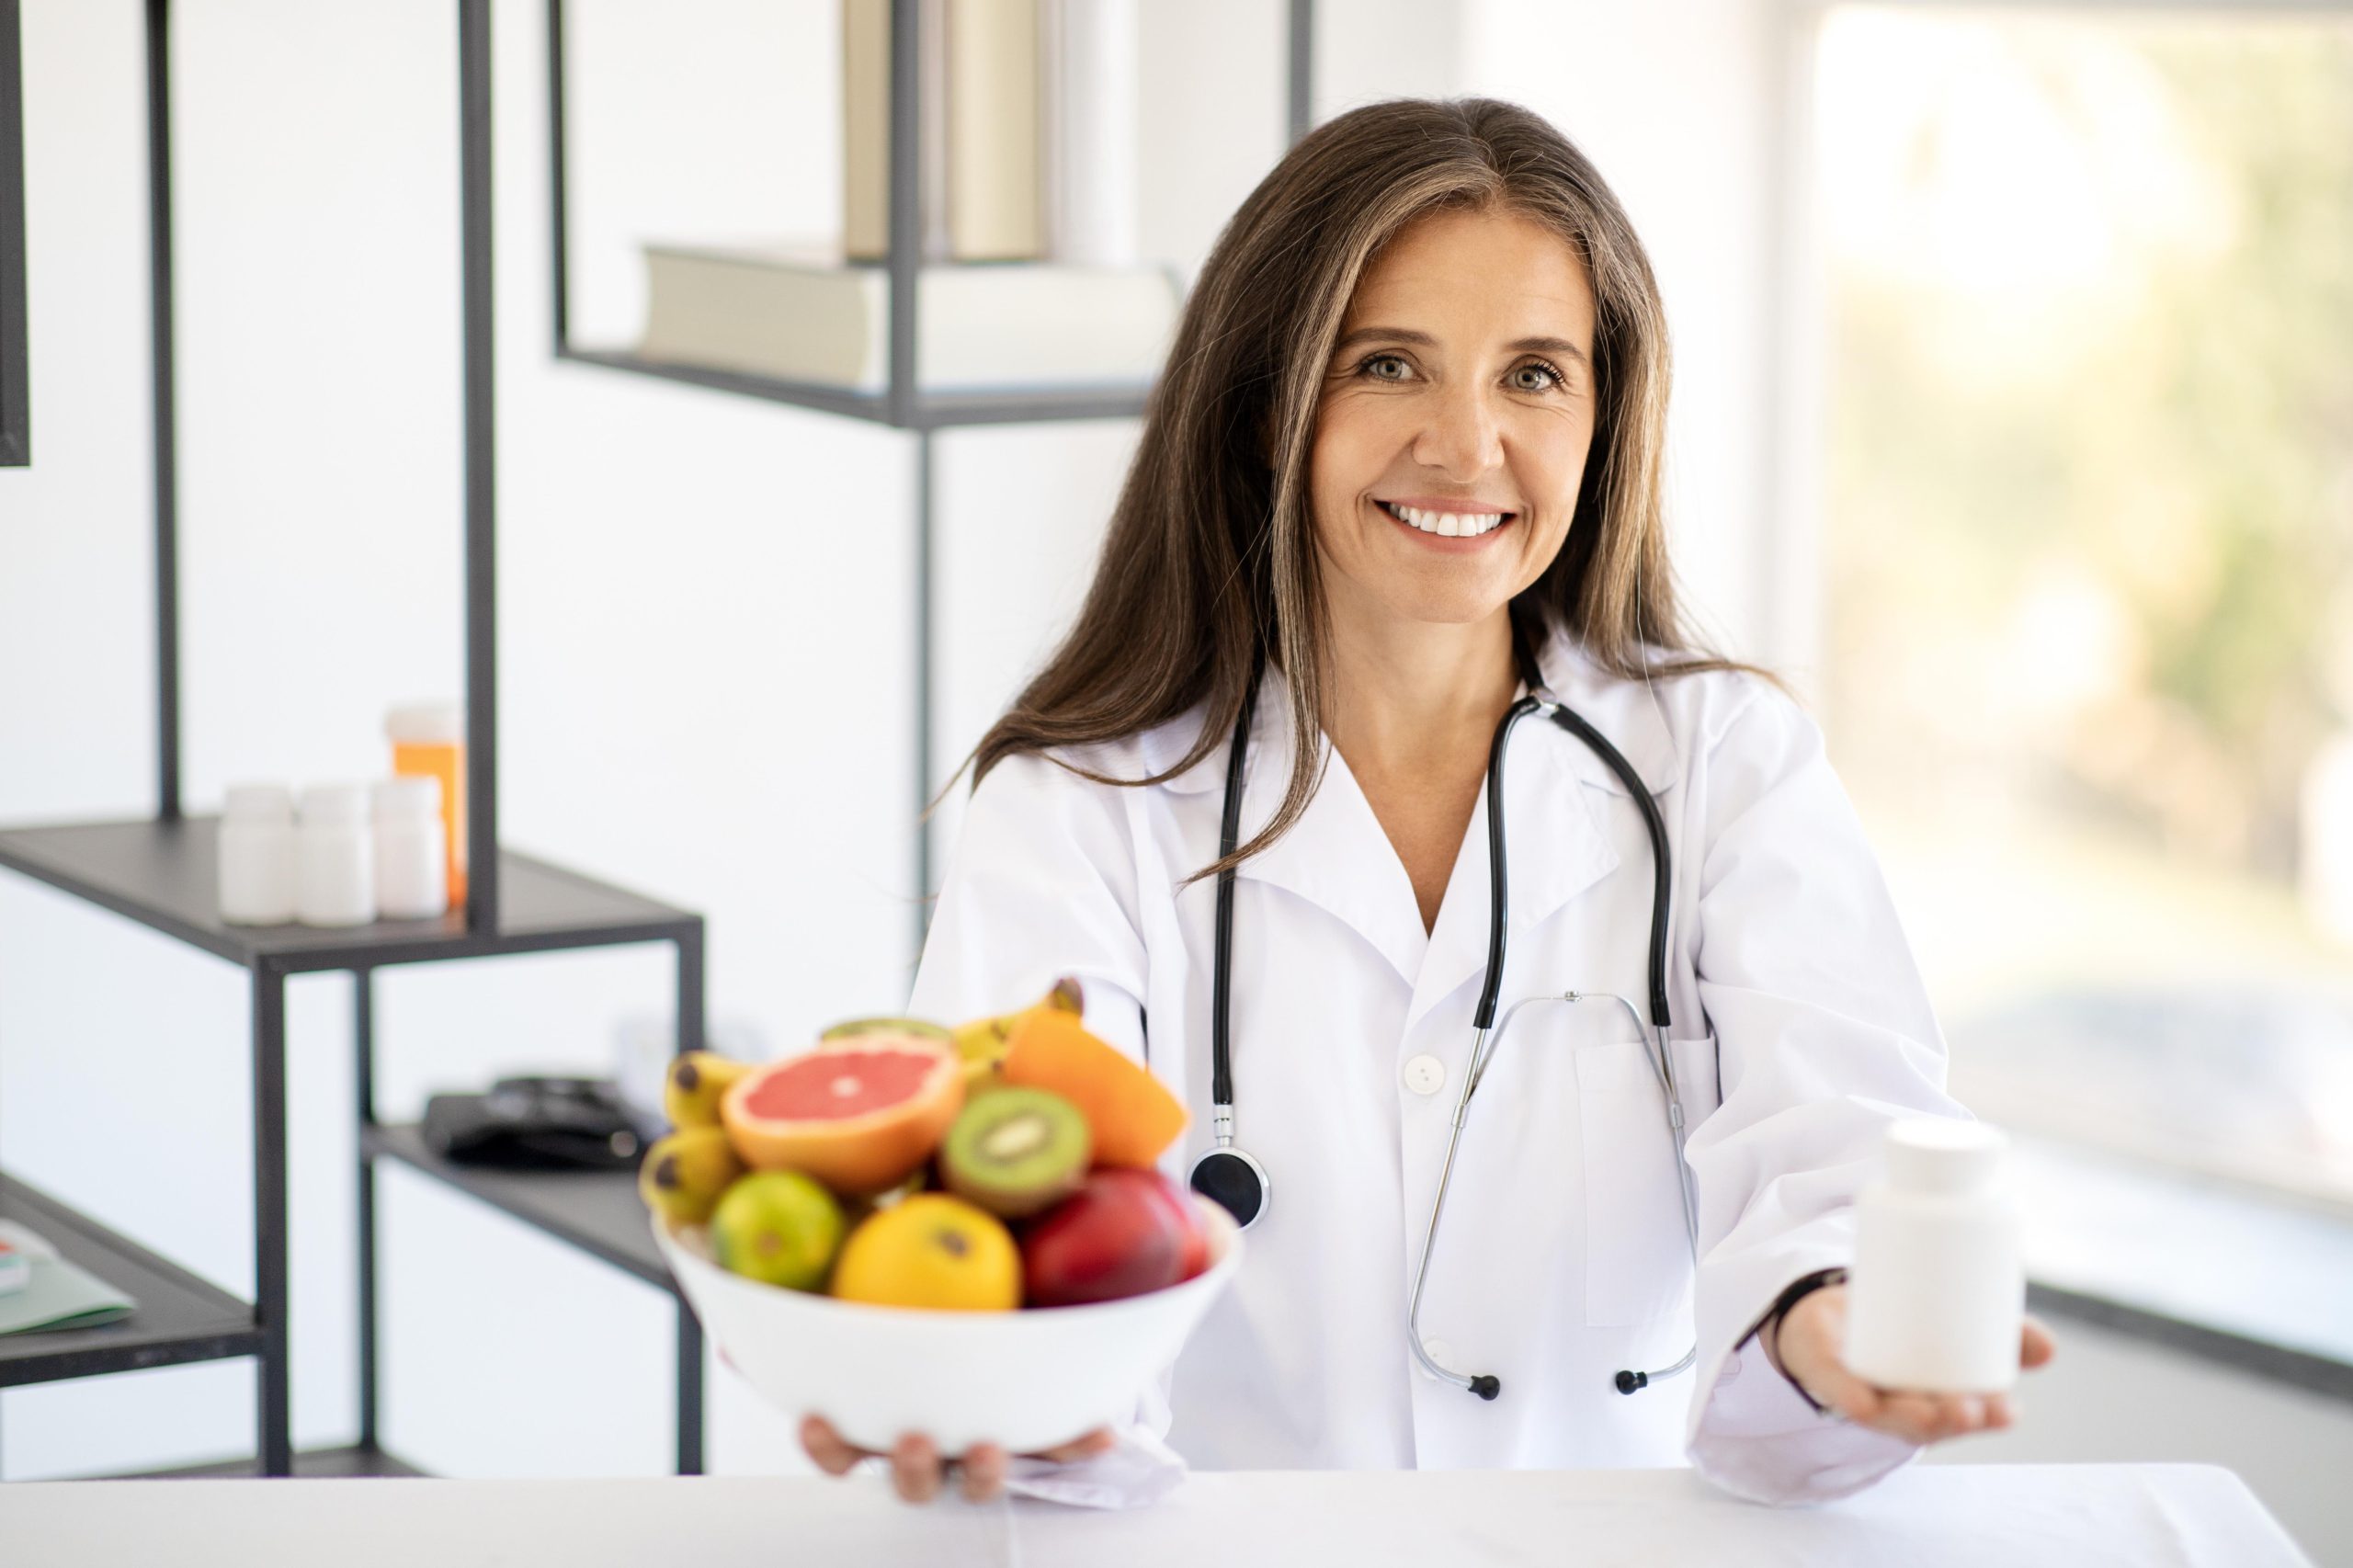 female healthcare worker holding a bowl of fruits and smiling